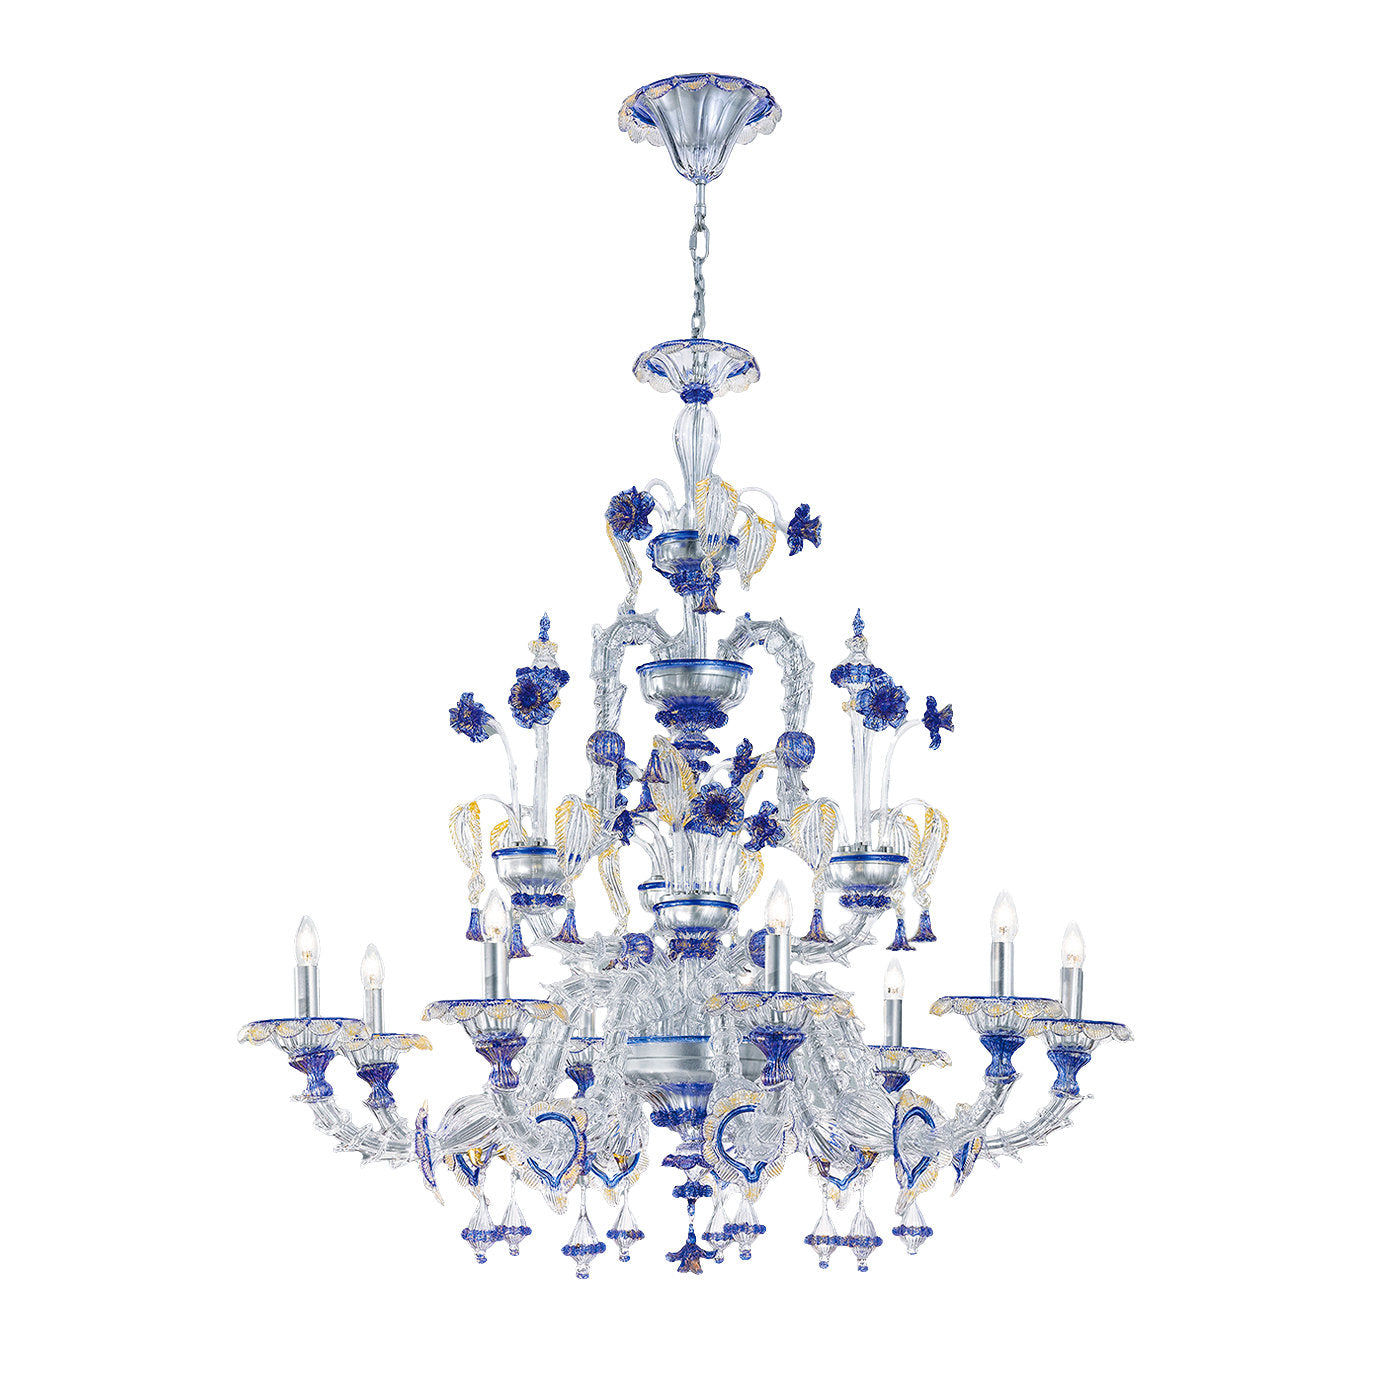 Rezzonico Blue and Crystal 9-Light Chandelier - Main view